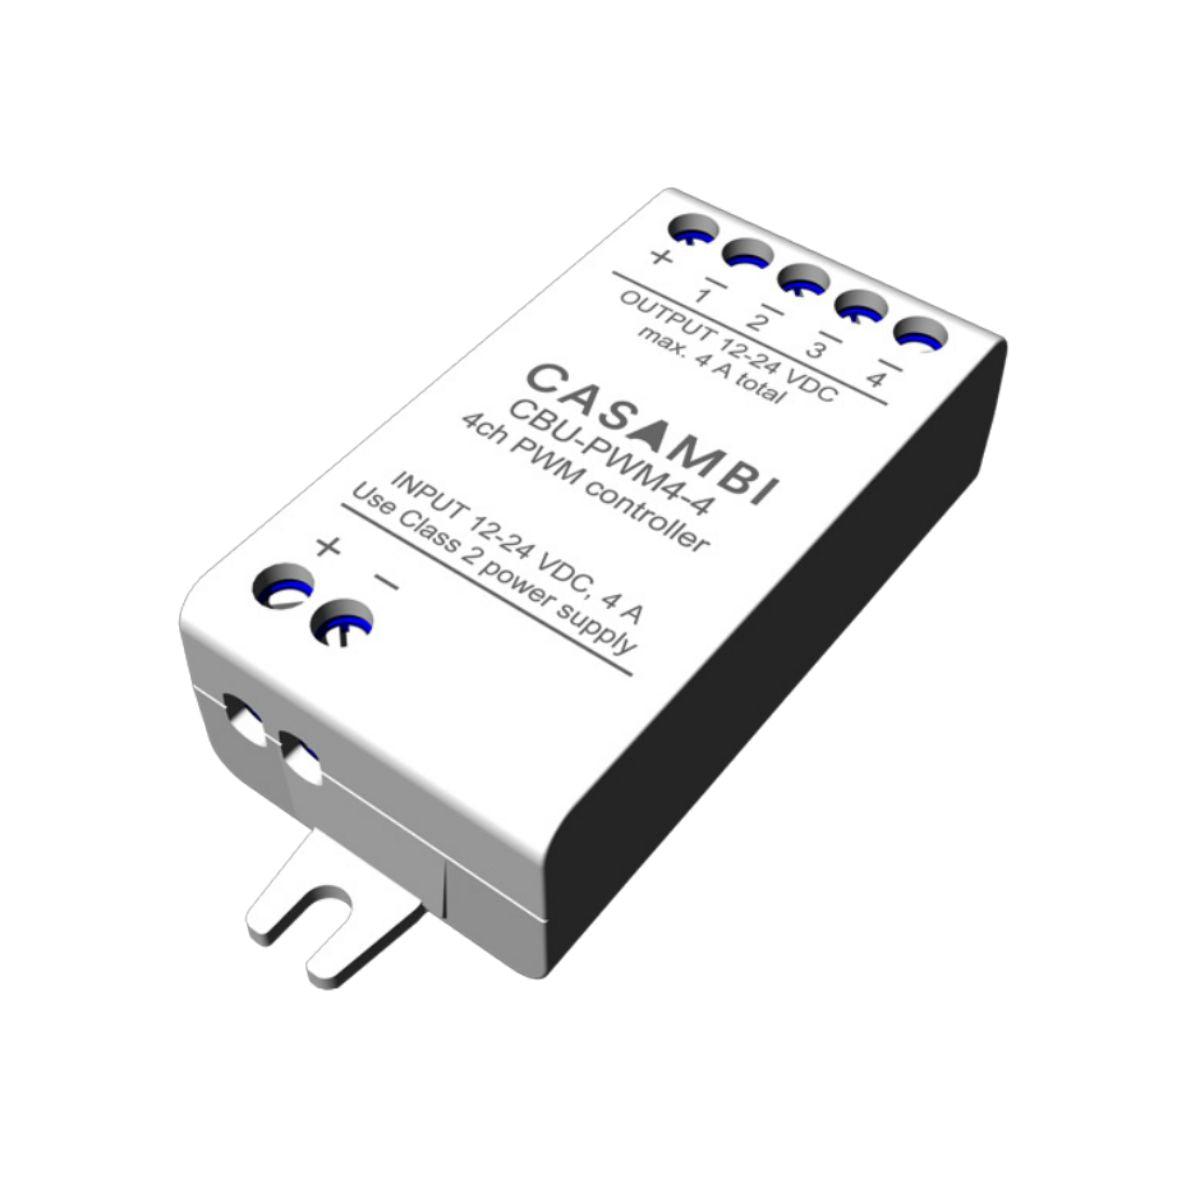 Casambi Bluetooth Controllable, 4 channels, PWM Dimmer, 12-24VDC